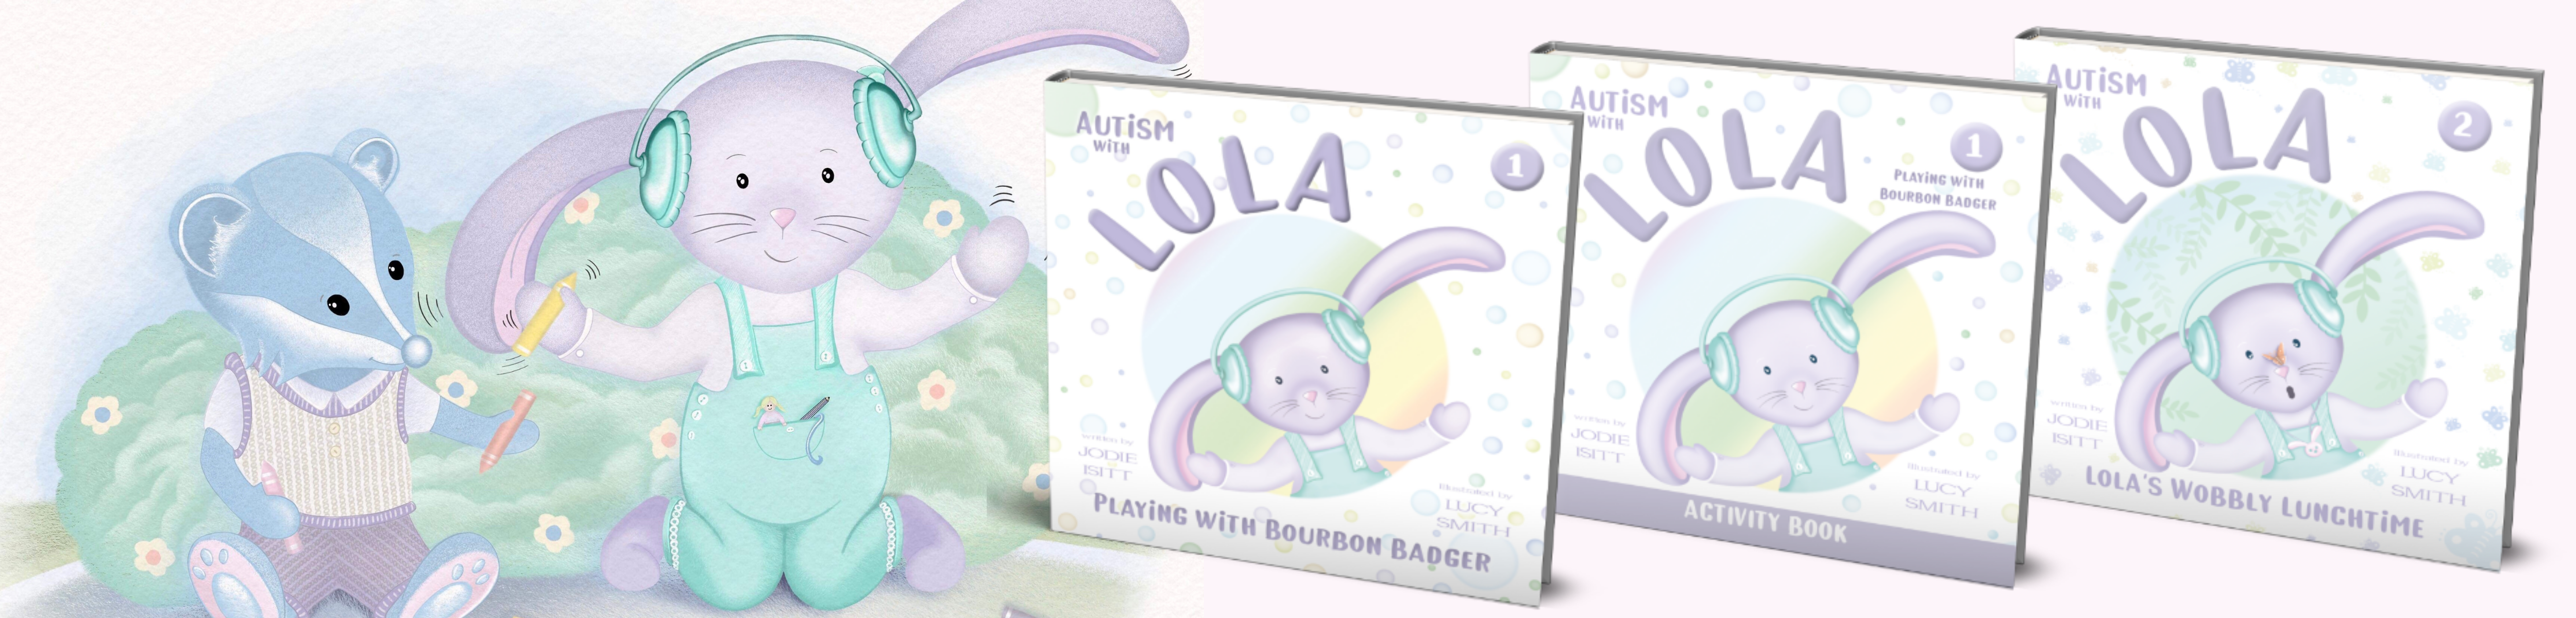 Covers of the "Autism With Lola" book series.